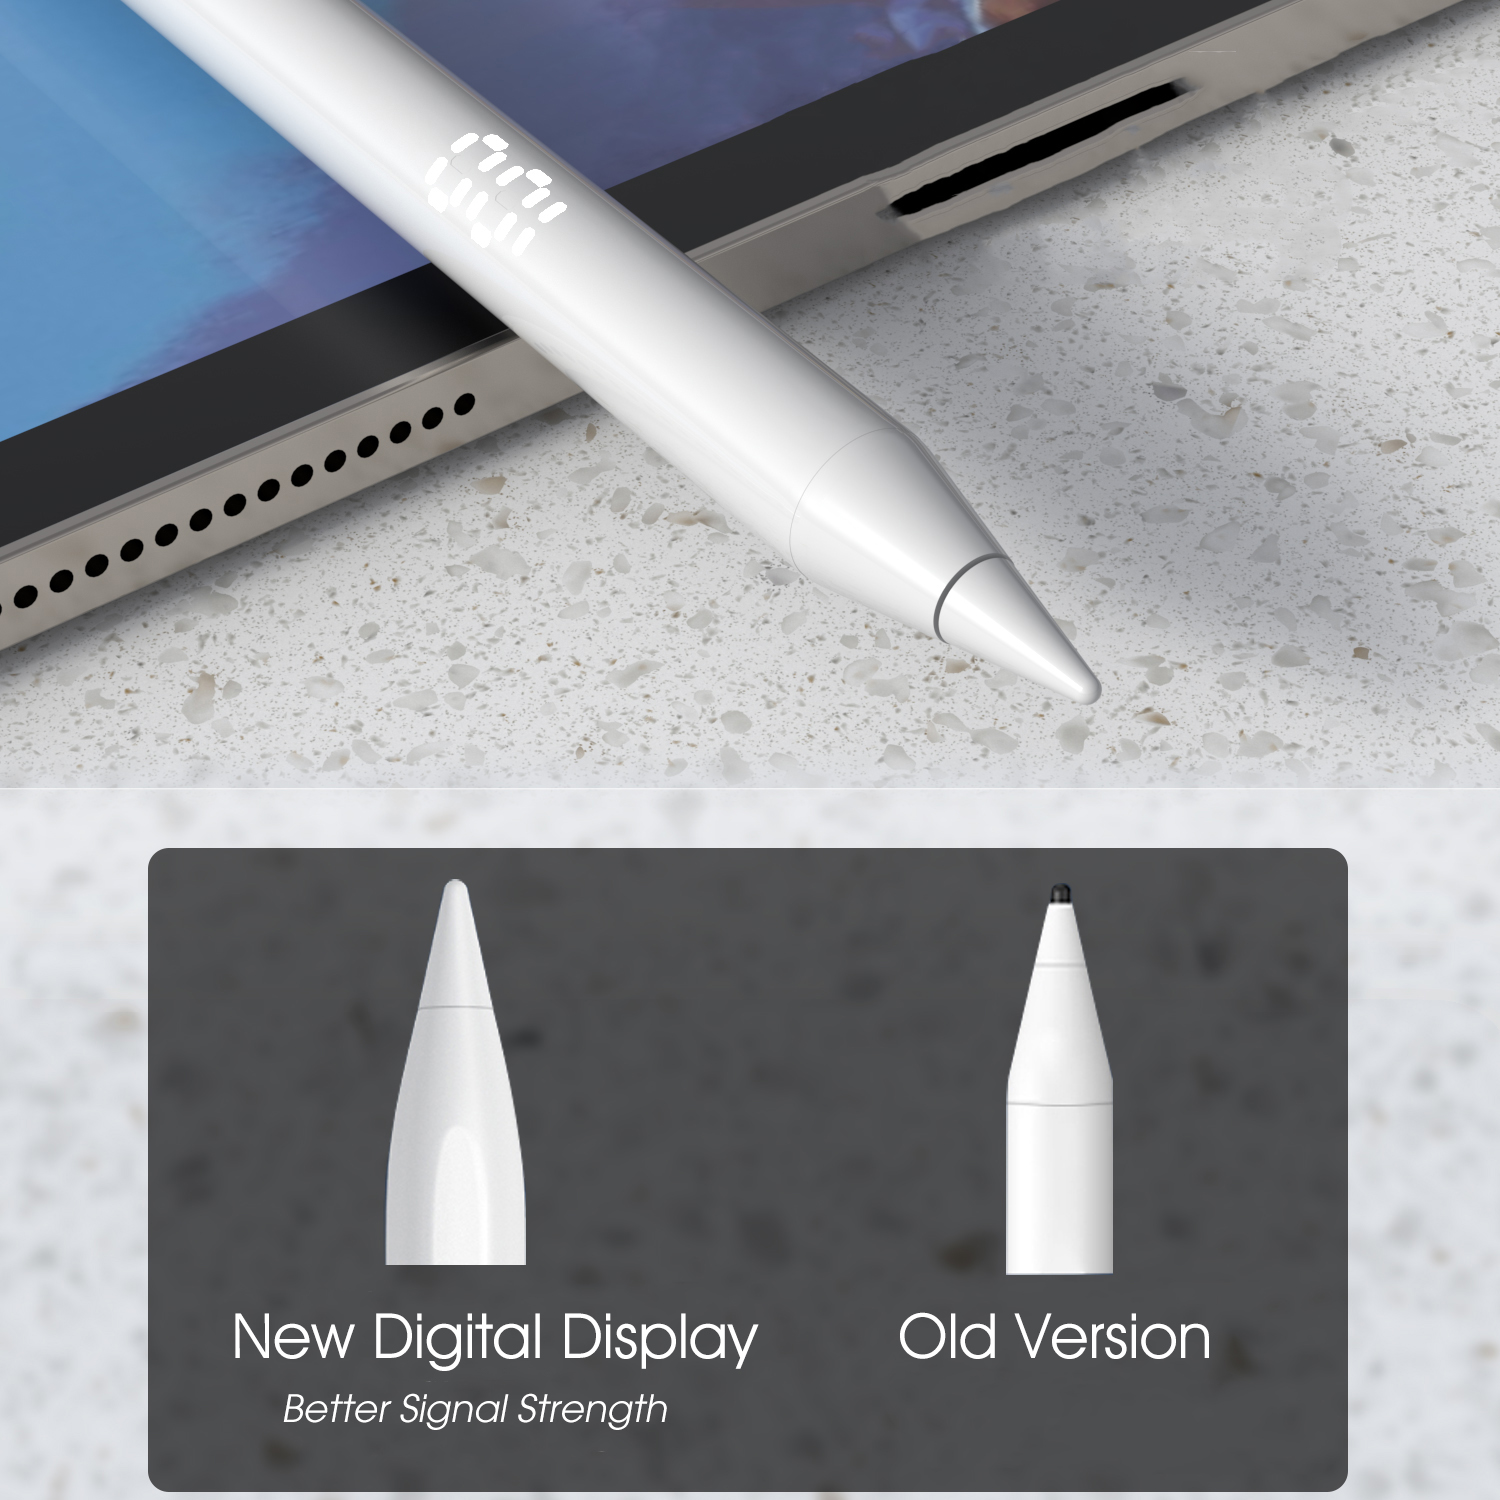 Bakeey-130mAh-Battery-Status-Display-Palm-Rejection-Active-Stylus-Pen-High-Sensitive-Capacitive-Pen--1898958-2